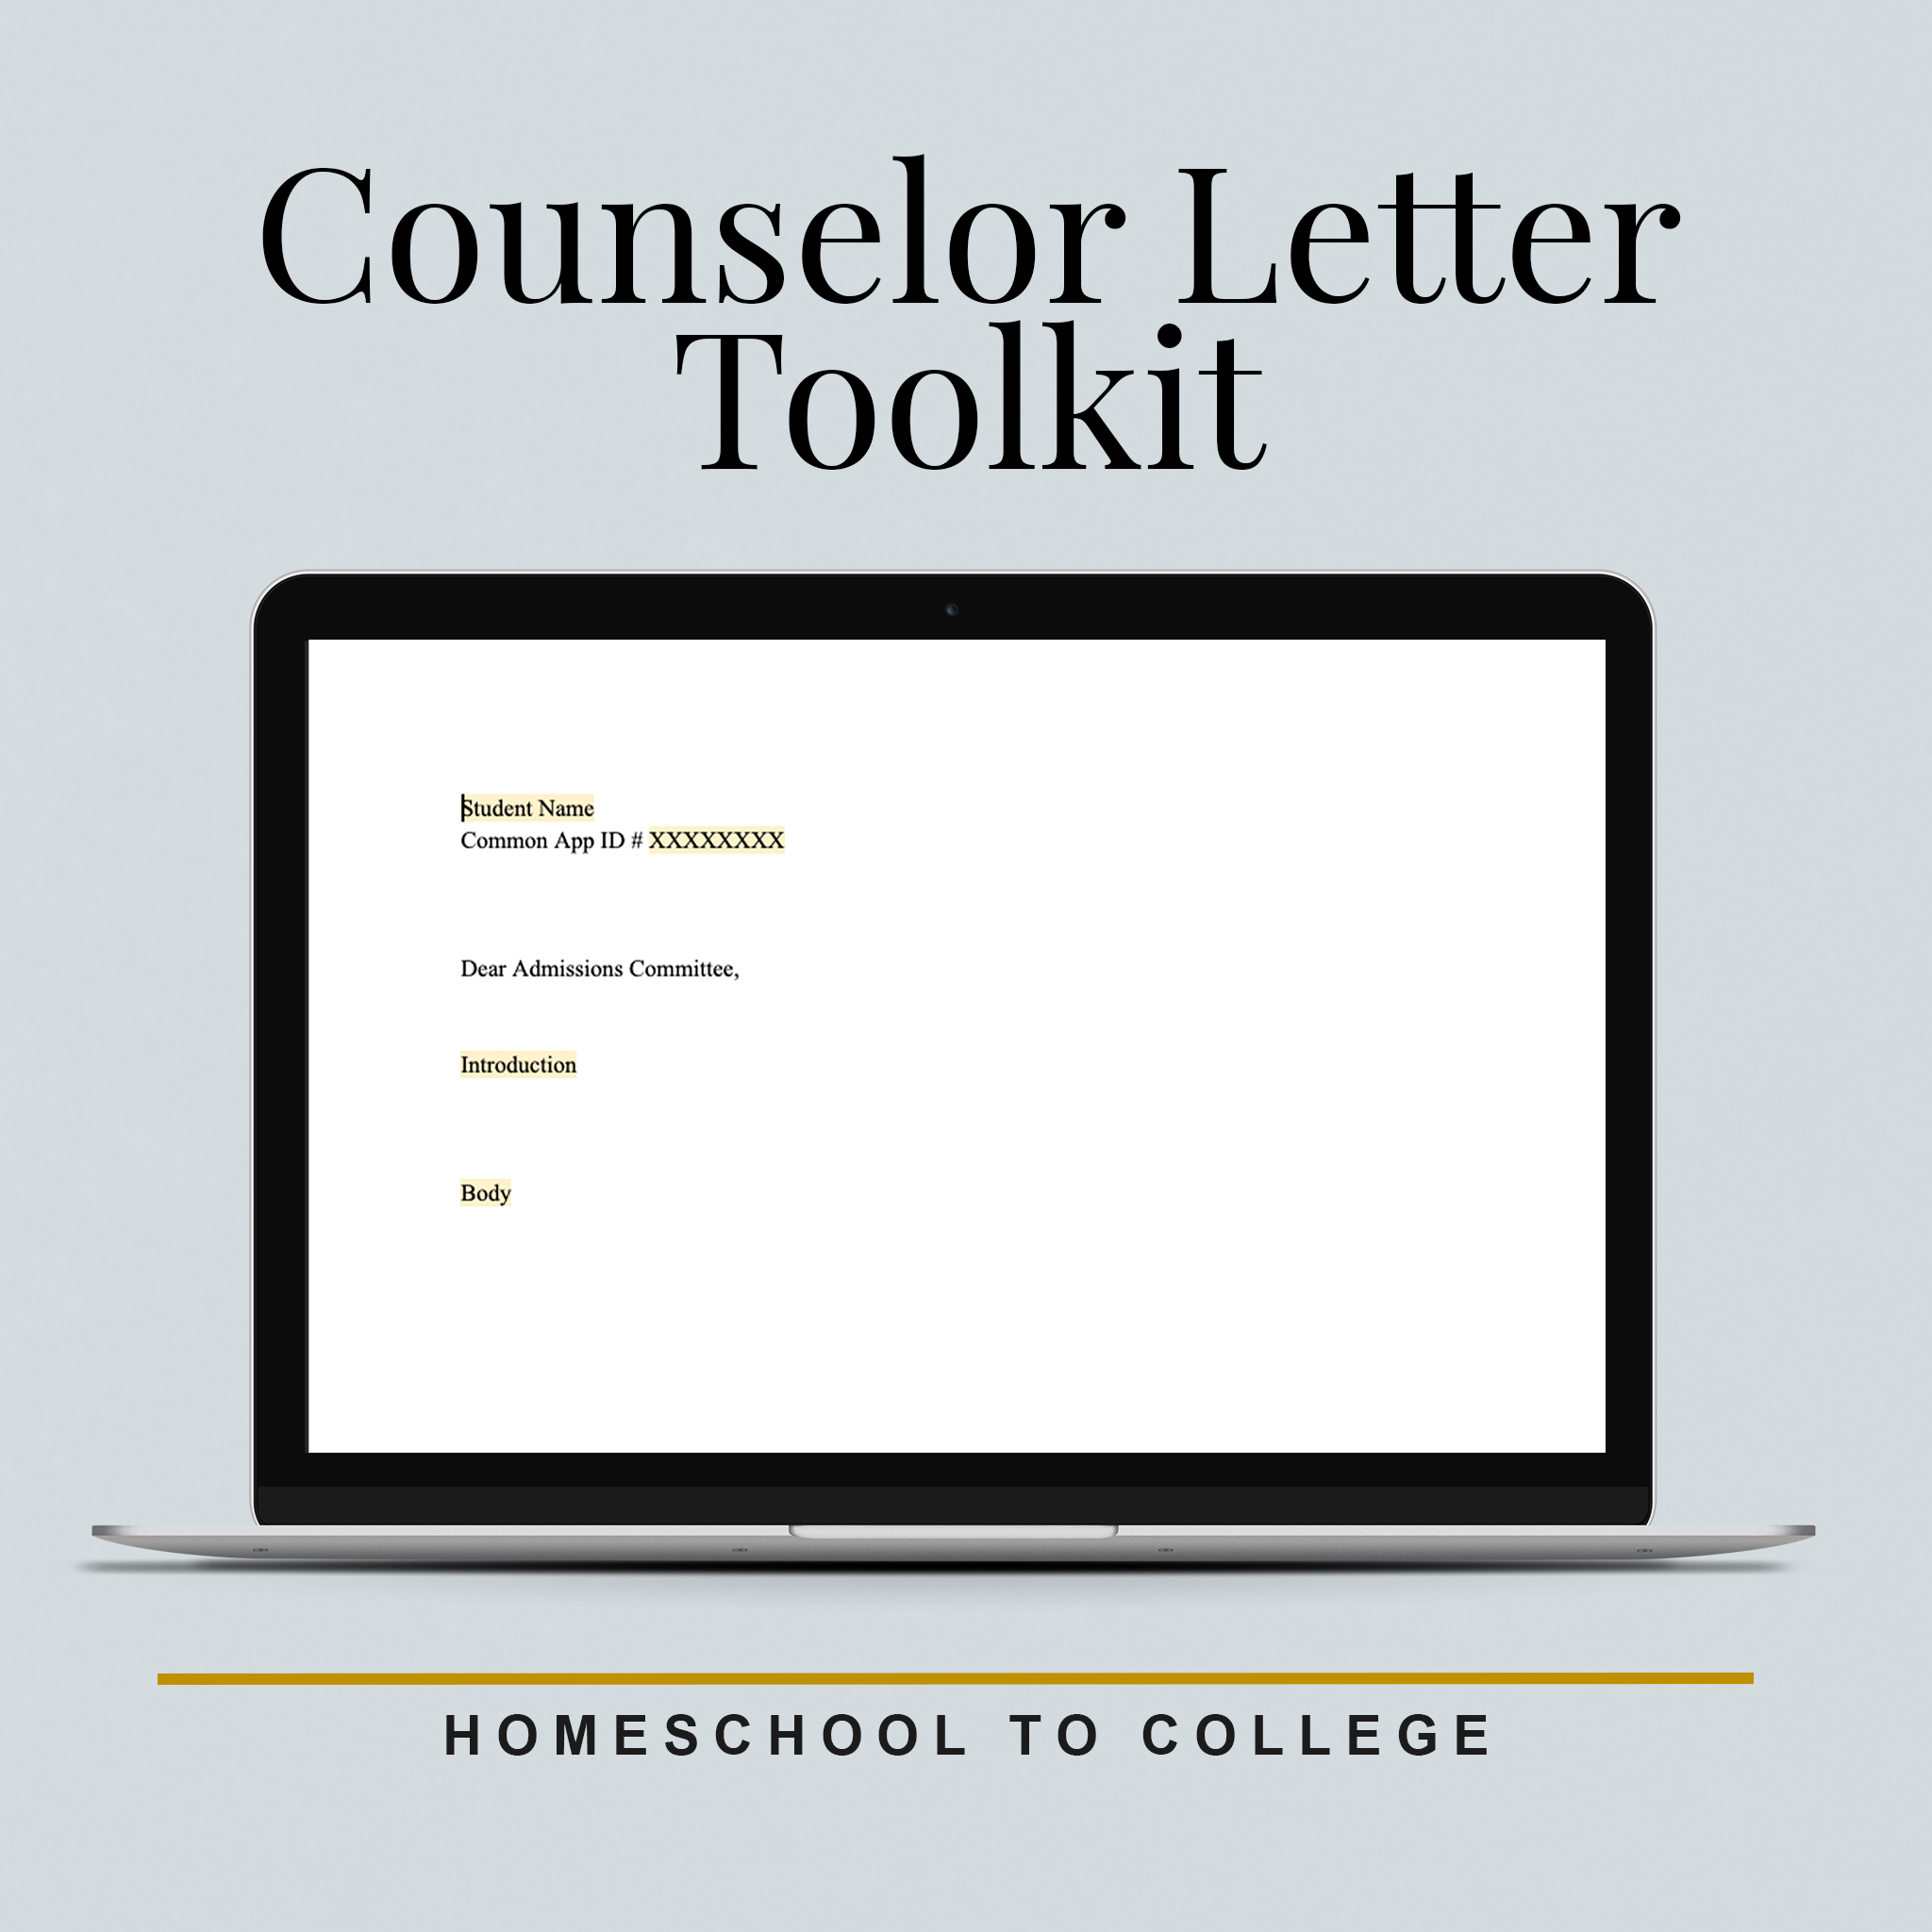 Counselor Letter Toolkit